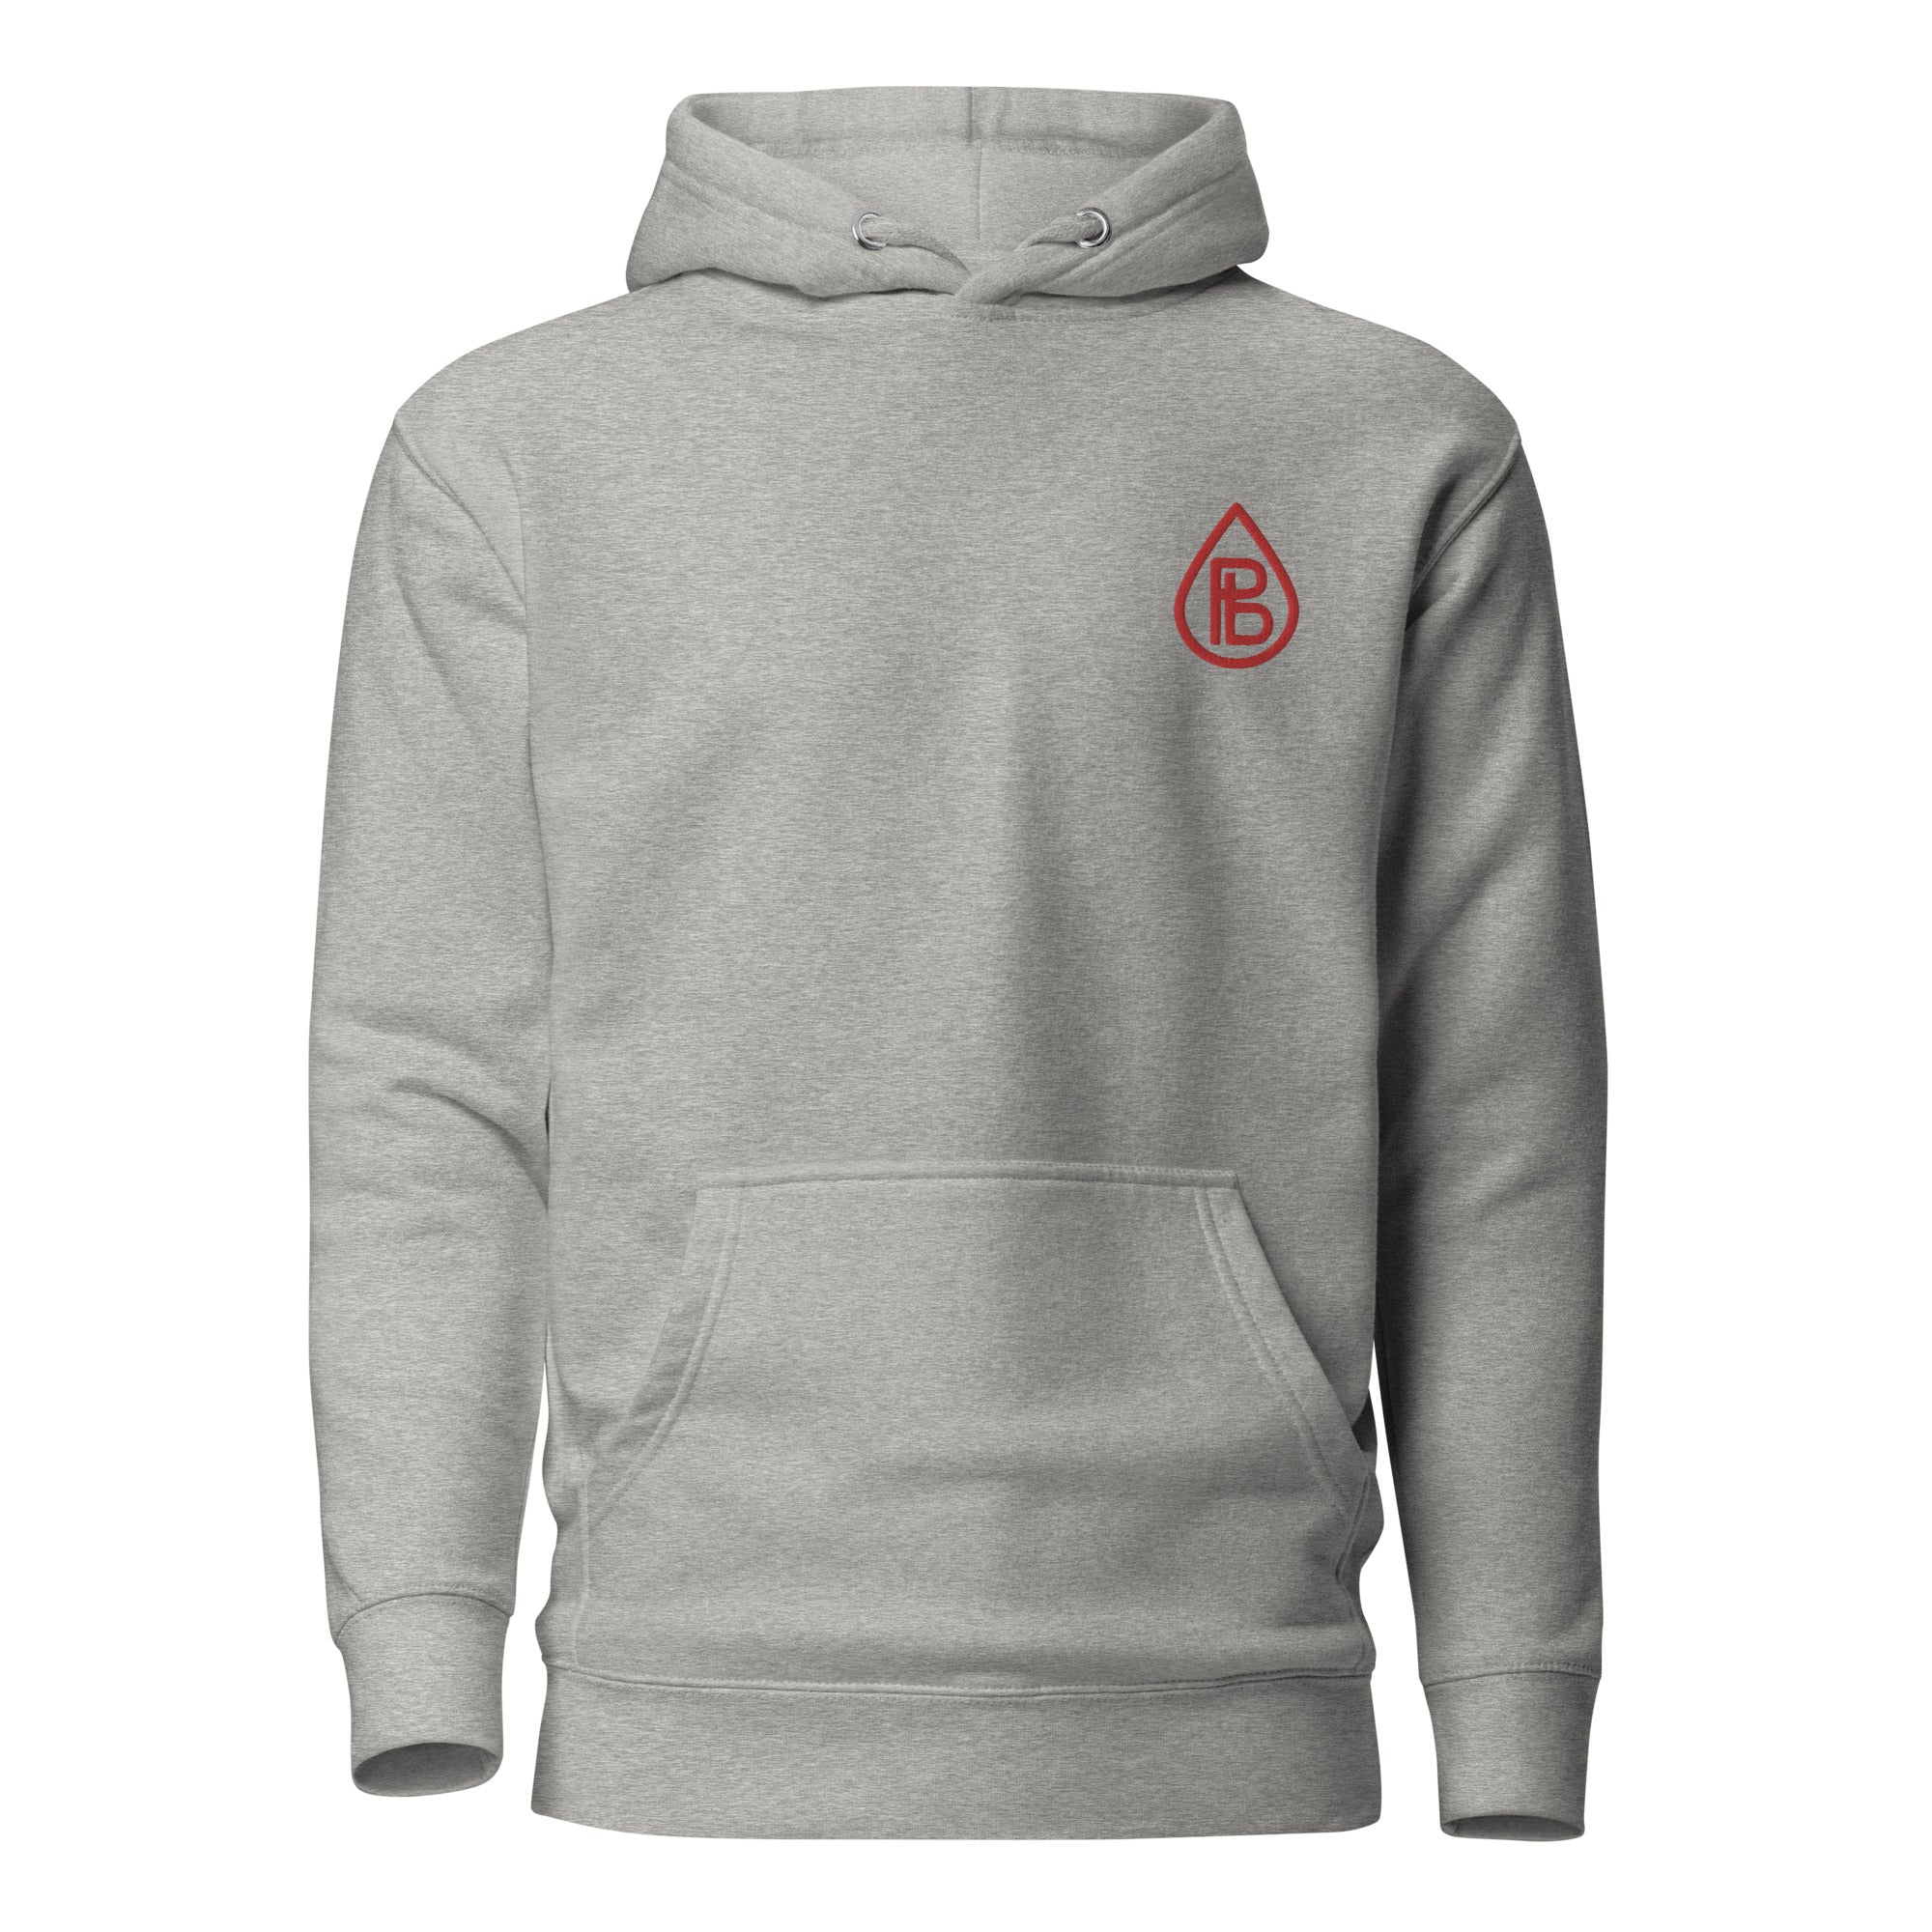 Pure blood Logo Embroidered Unisex Hoodie